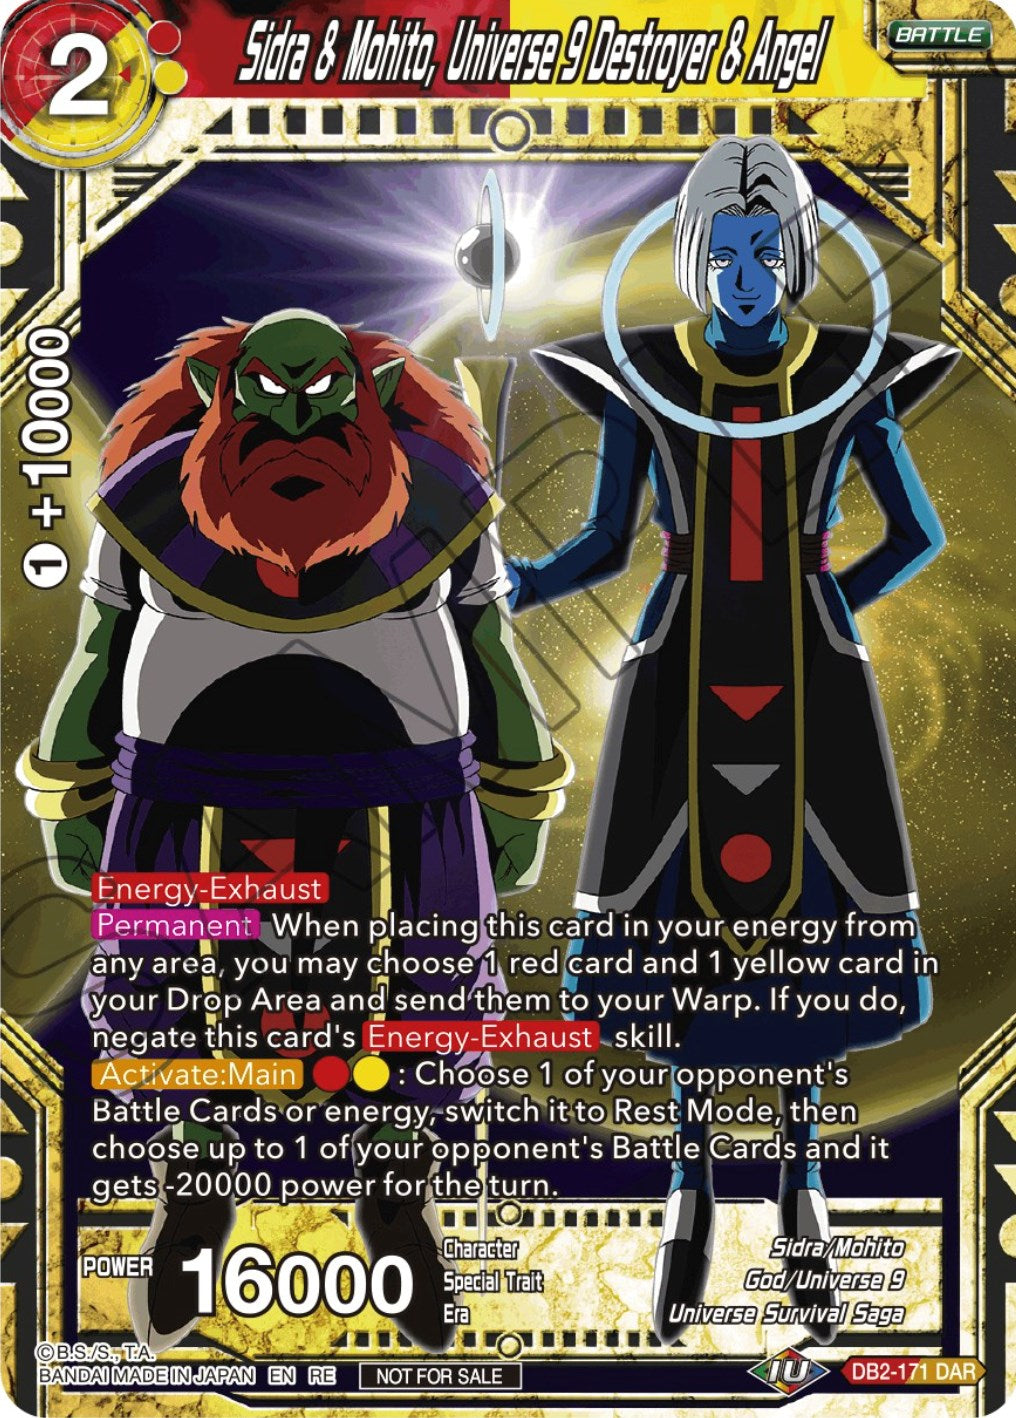 Sidra & Mohito, Universe 9 Destroyer & Angel (Championship Selection Pack 2023 Vol.2) (Silver Foil) (DB2-171) [Tournament Promotion Cards] | Devastation Store